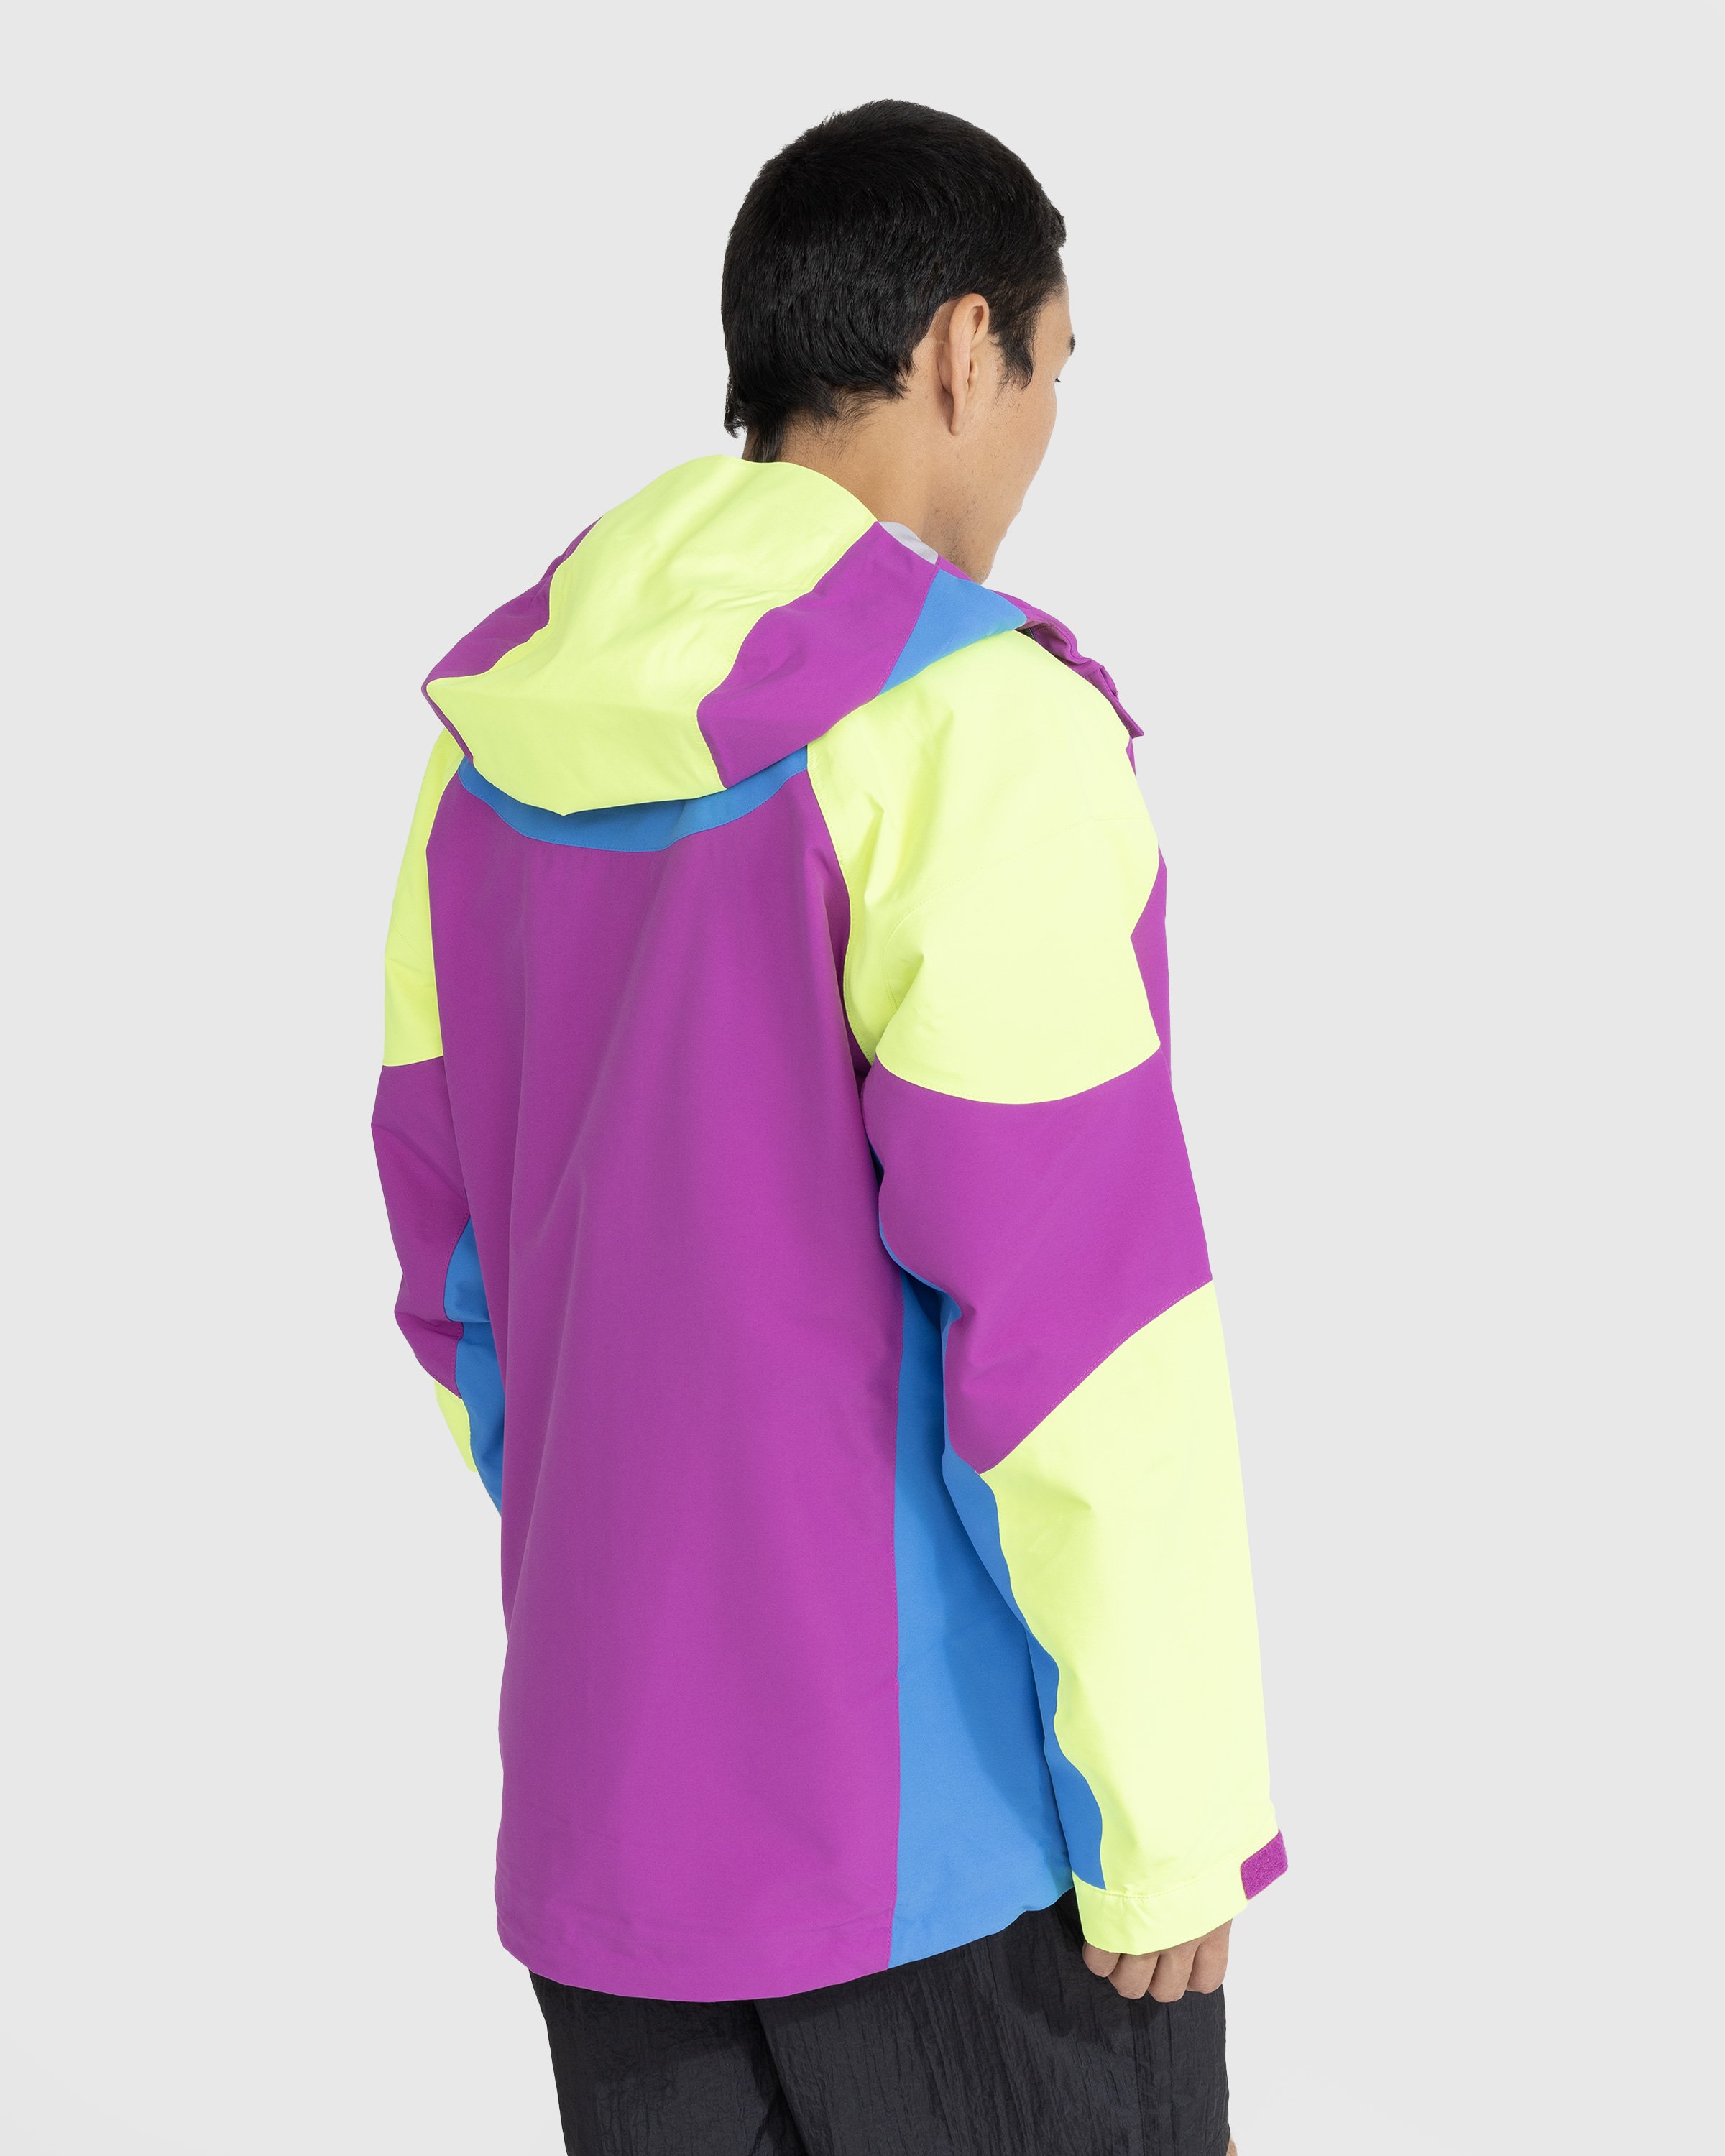 The North Face - 3L DryVent Carduelis Jacket Purple Cactus Flower/LED Yellow/Super Sonic Blue - Clothing - Multi - Image 3